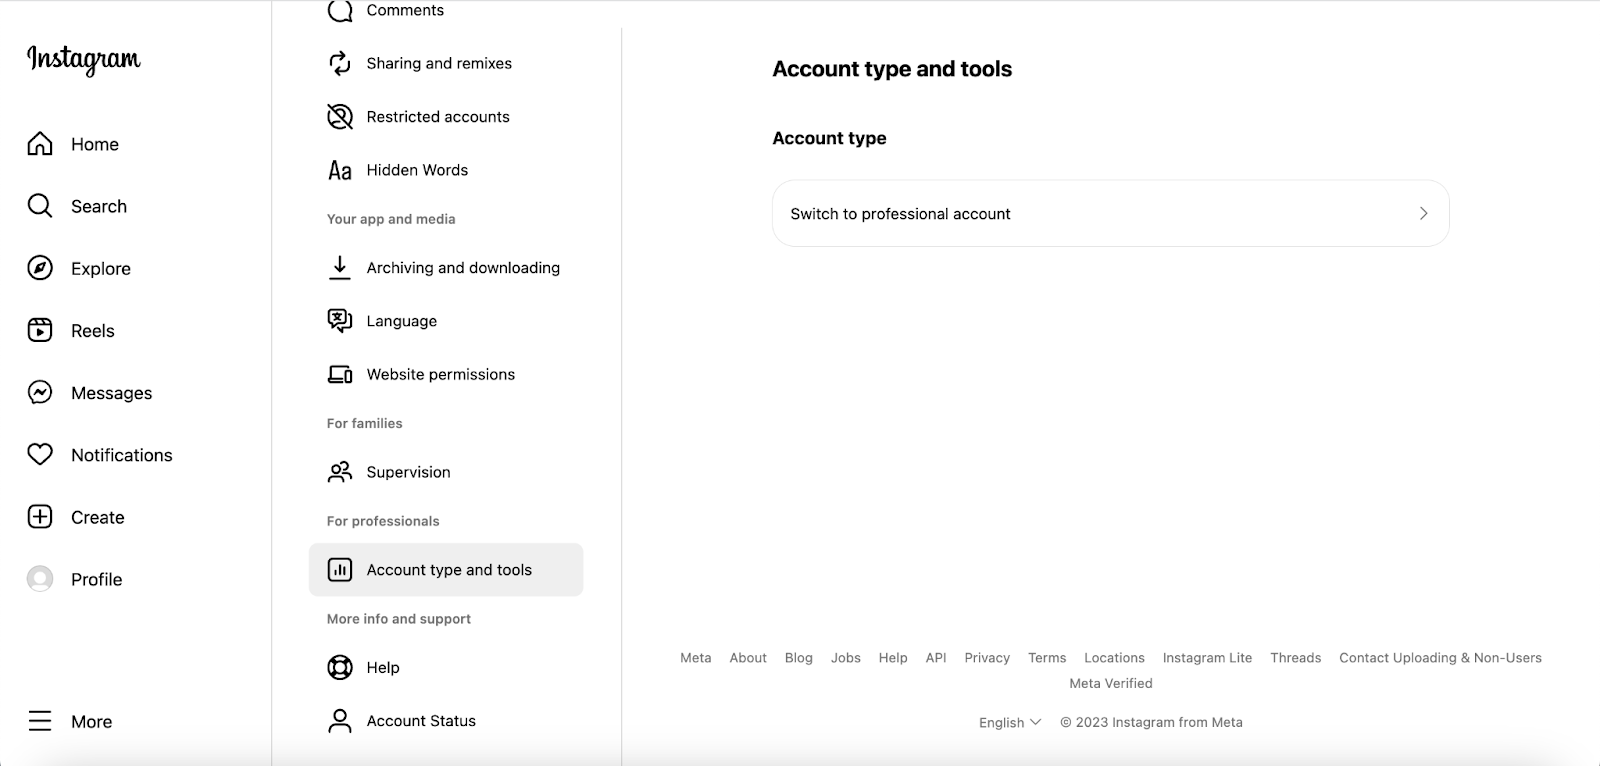 Account type and tools